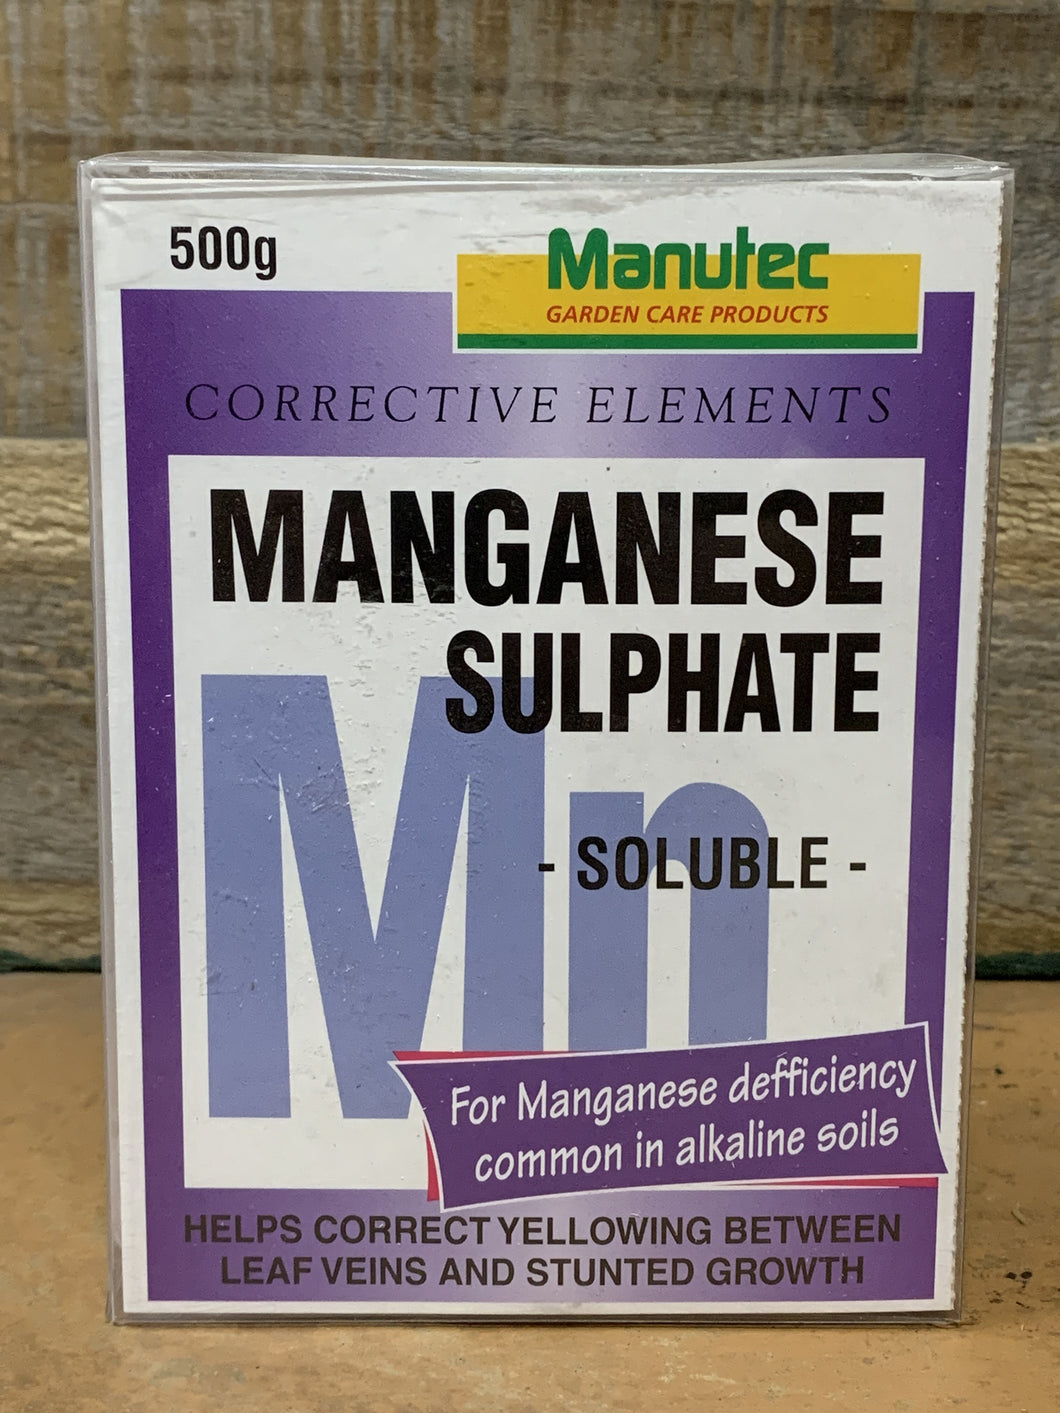 Manganese Sulphate - Soluble